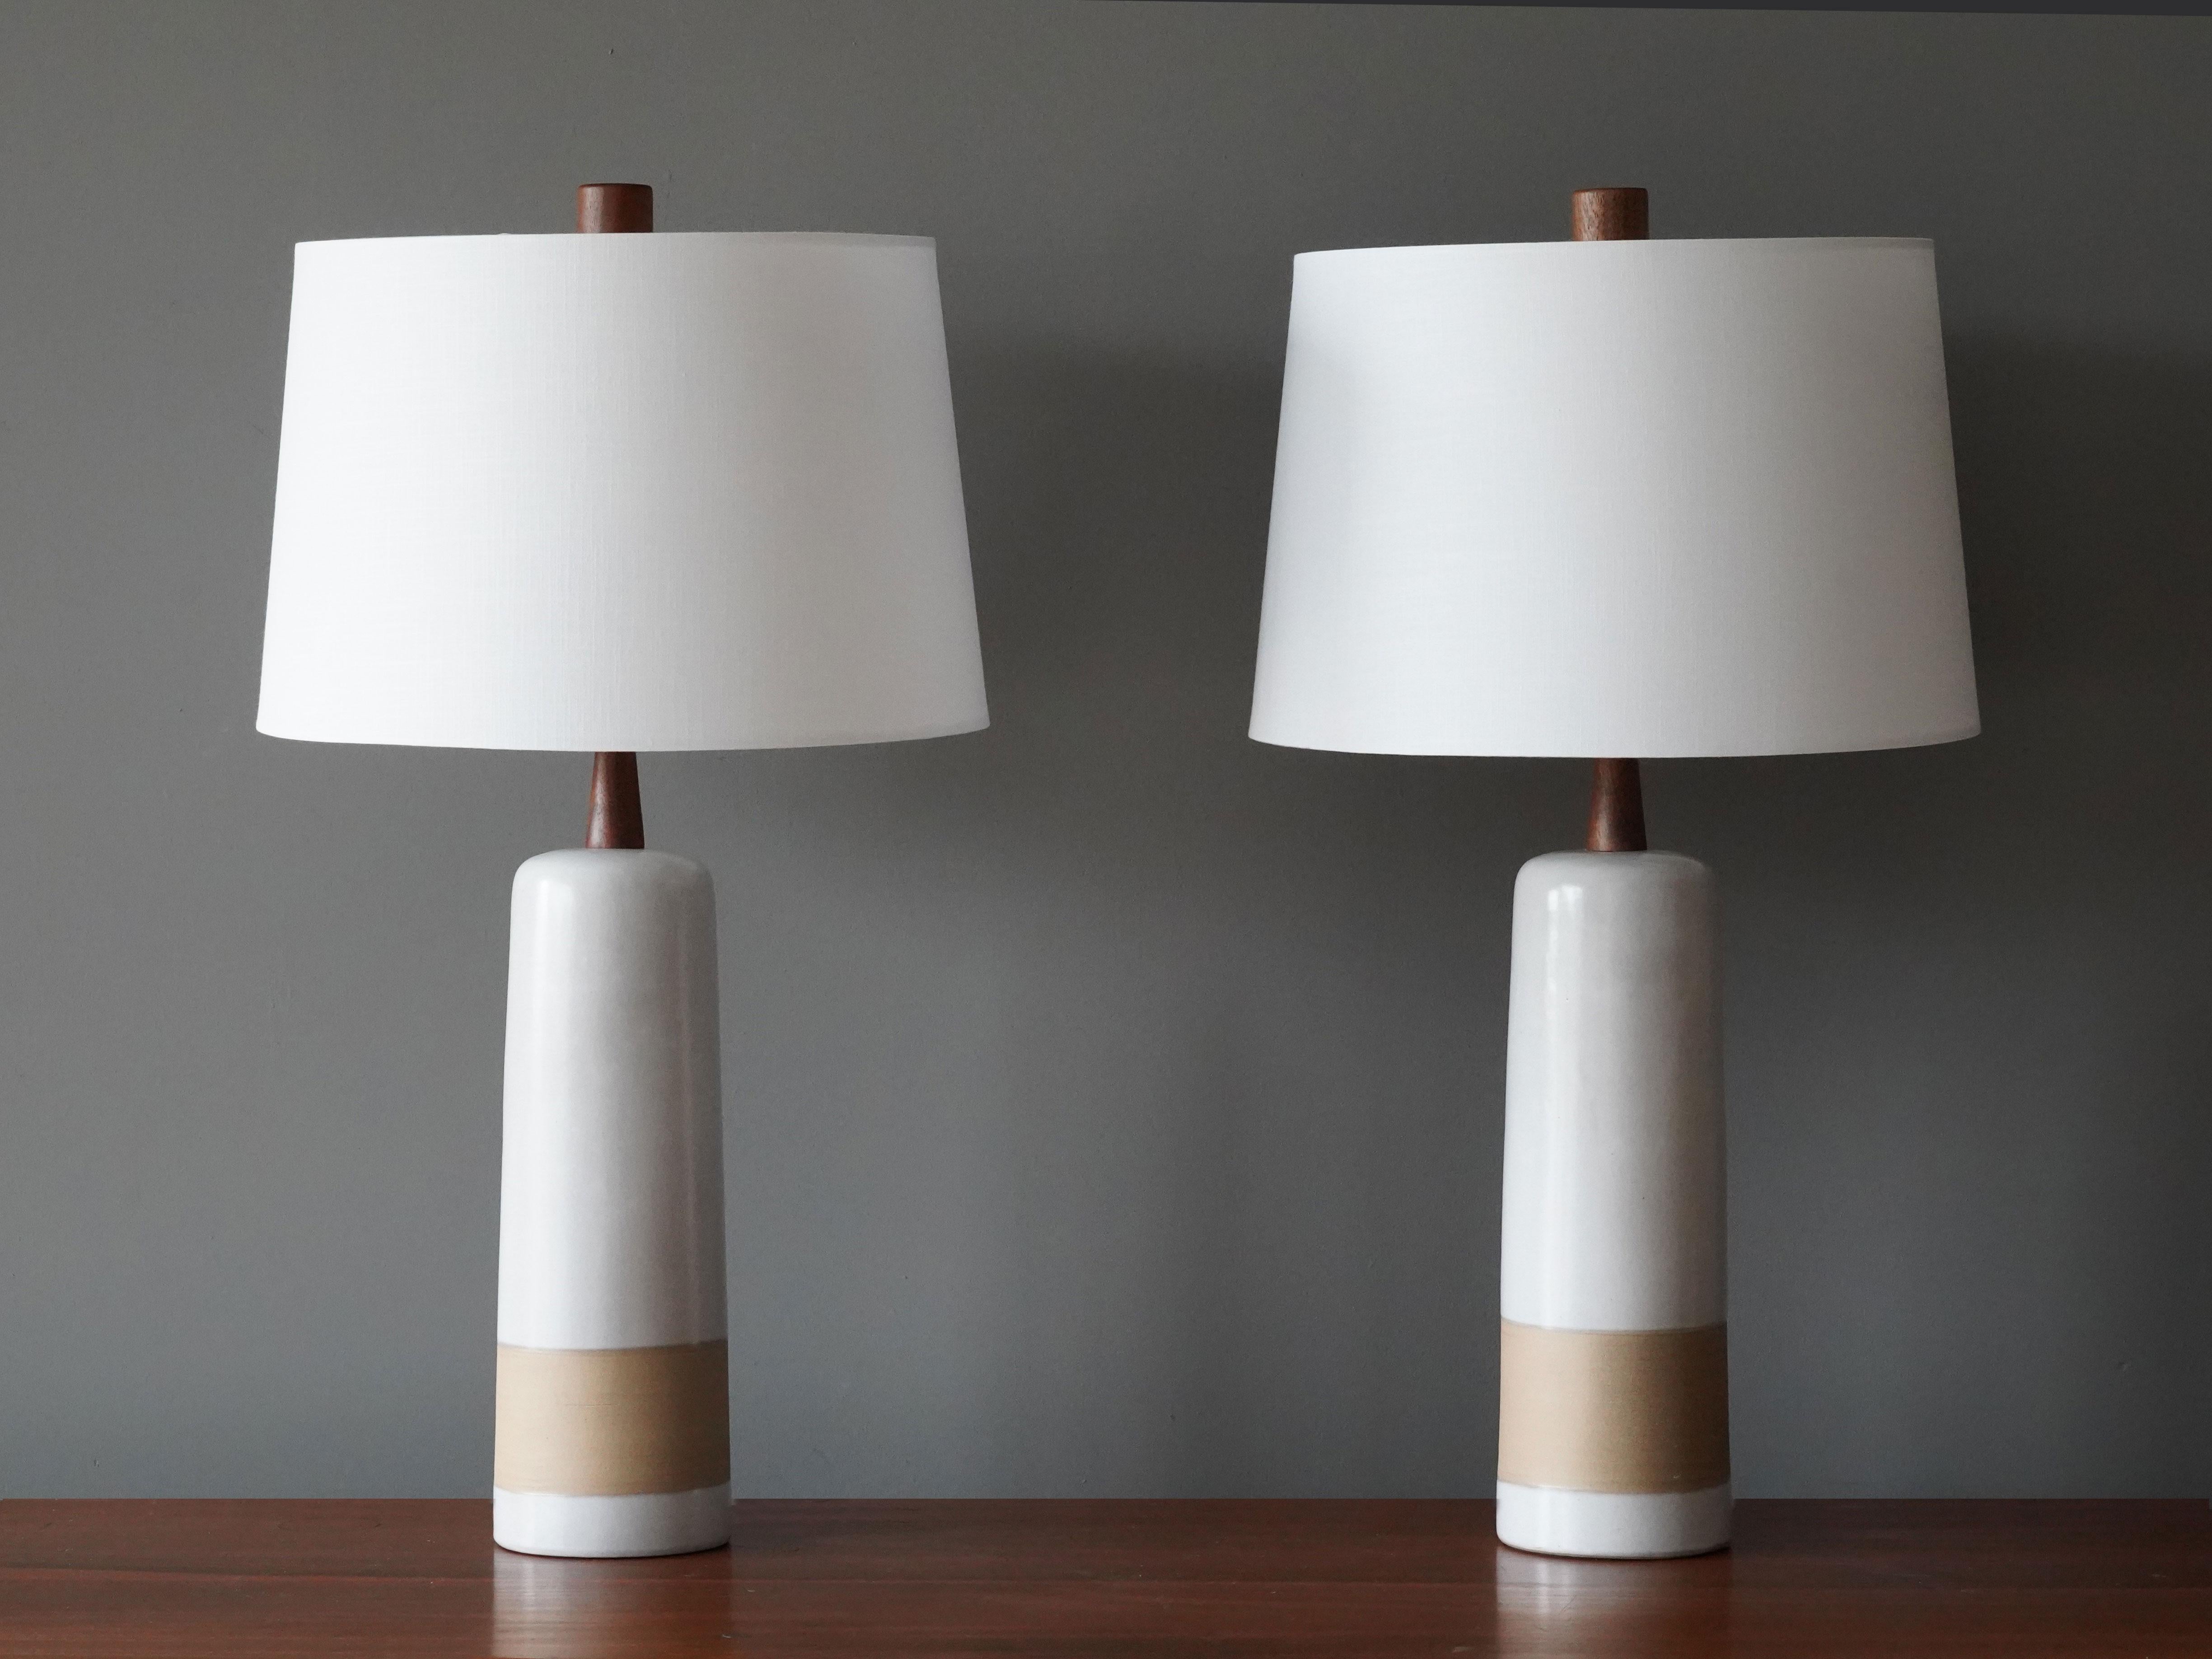 A pair of table lamps designed by husband and wife duo Jane & Gordon Martz. Produced by Marshall Studios, Indianapolis. 

The white / beige bases are slip-cast and then dipped into glaze and hand-painted. Design also incorporates exquisite walnut